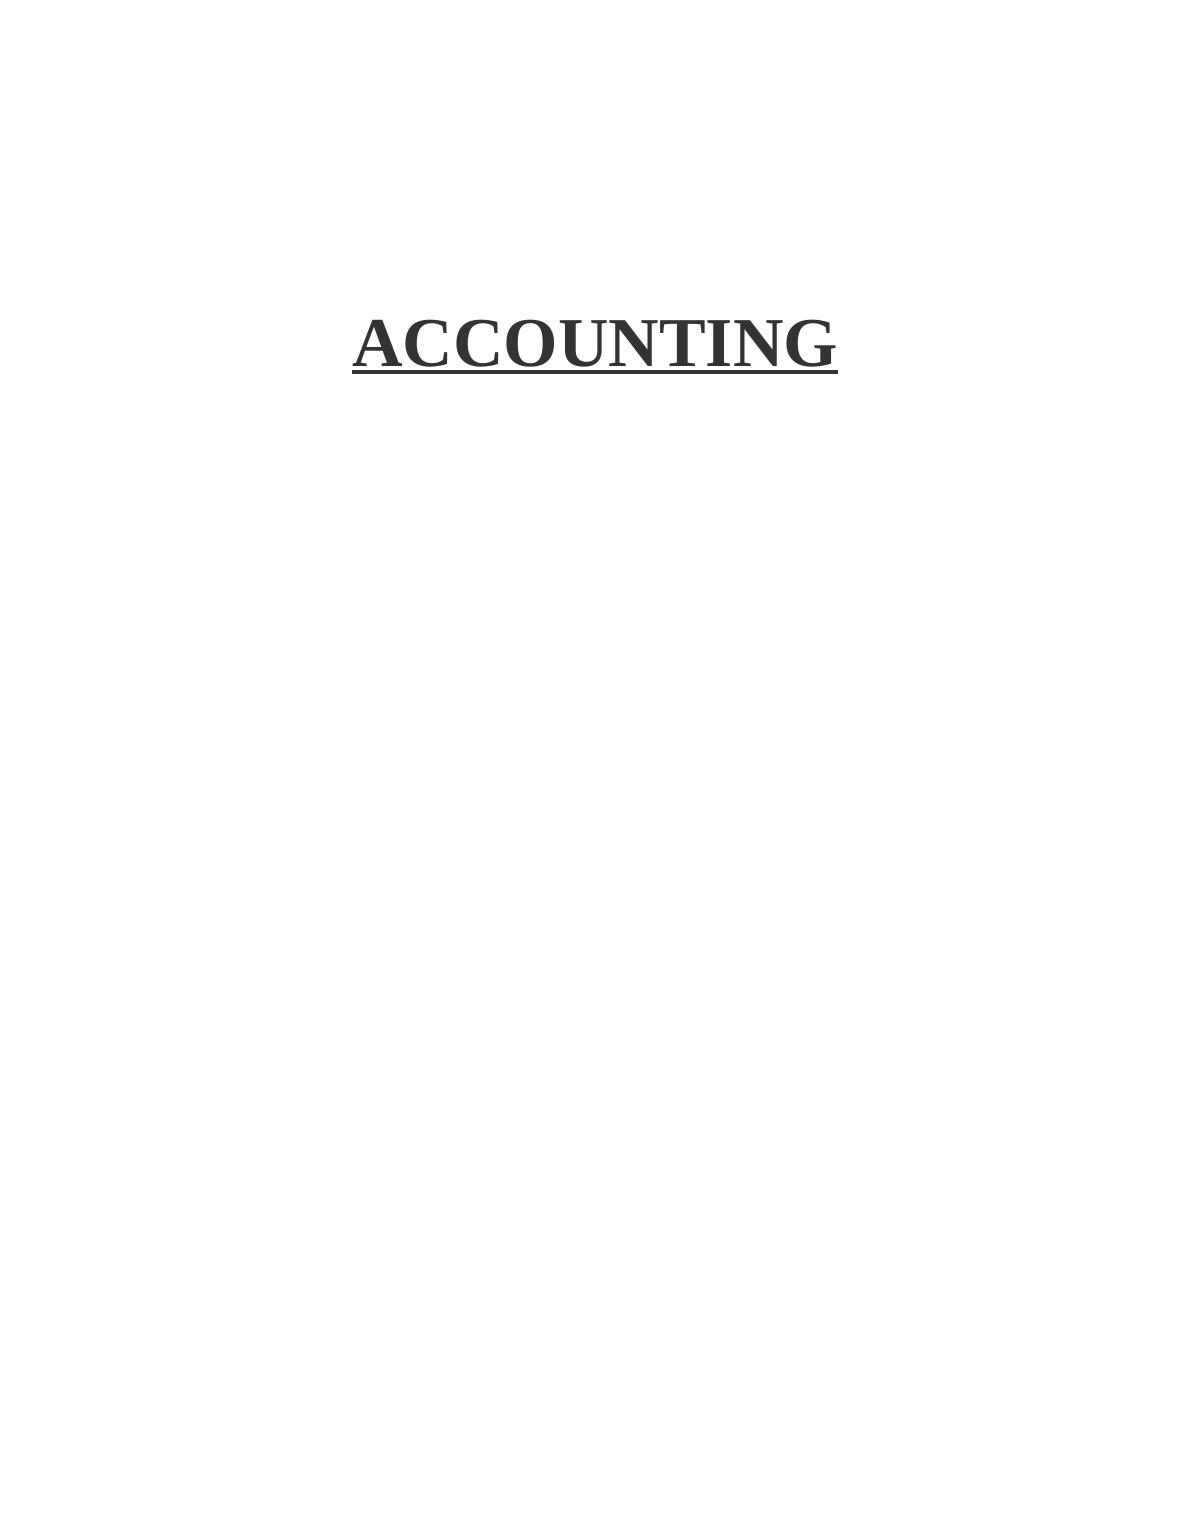 Accounting: Business Transactions, Financial Statements, Fundamental Principles_1